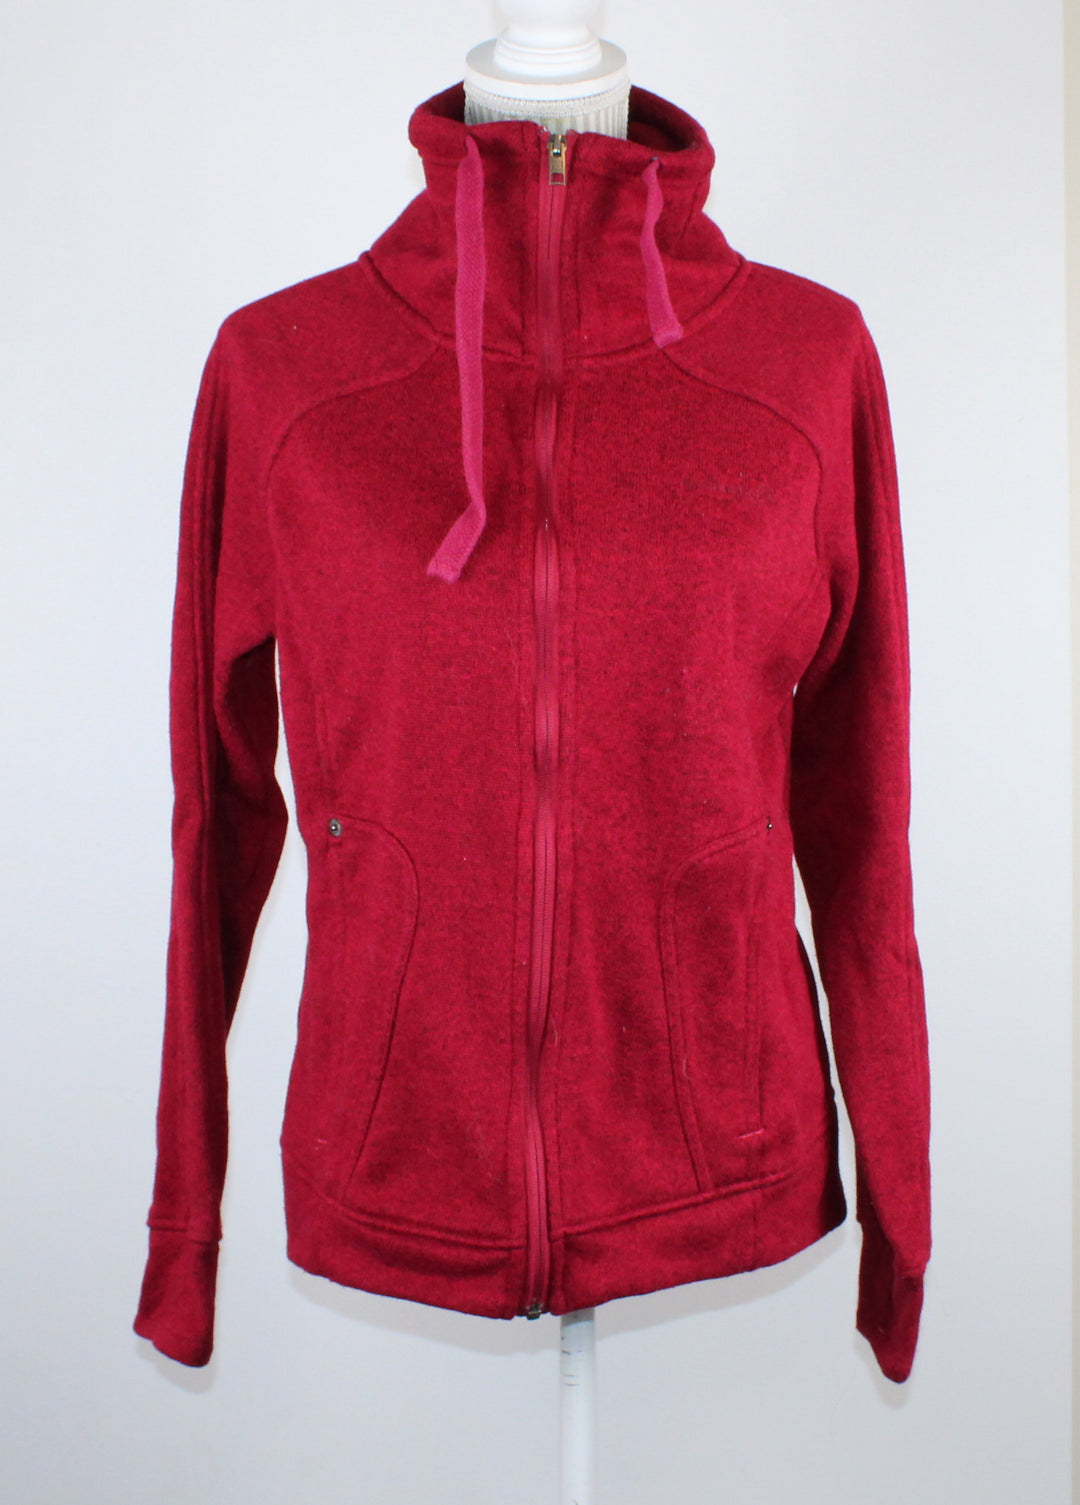 AVALANCHE THICK SWEATER MAROON LADIES LARGE EUC